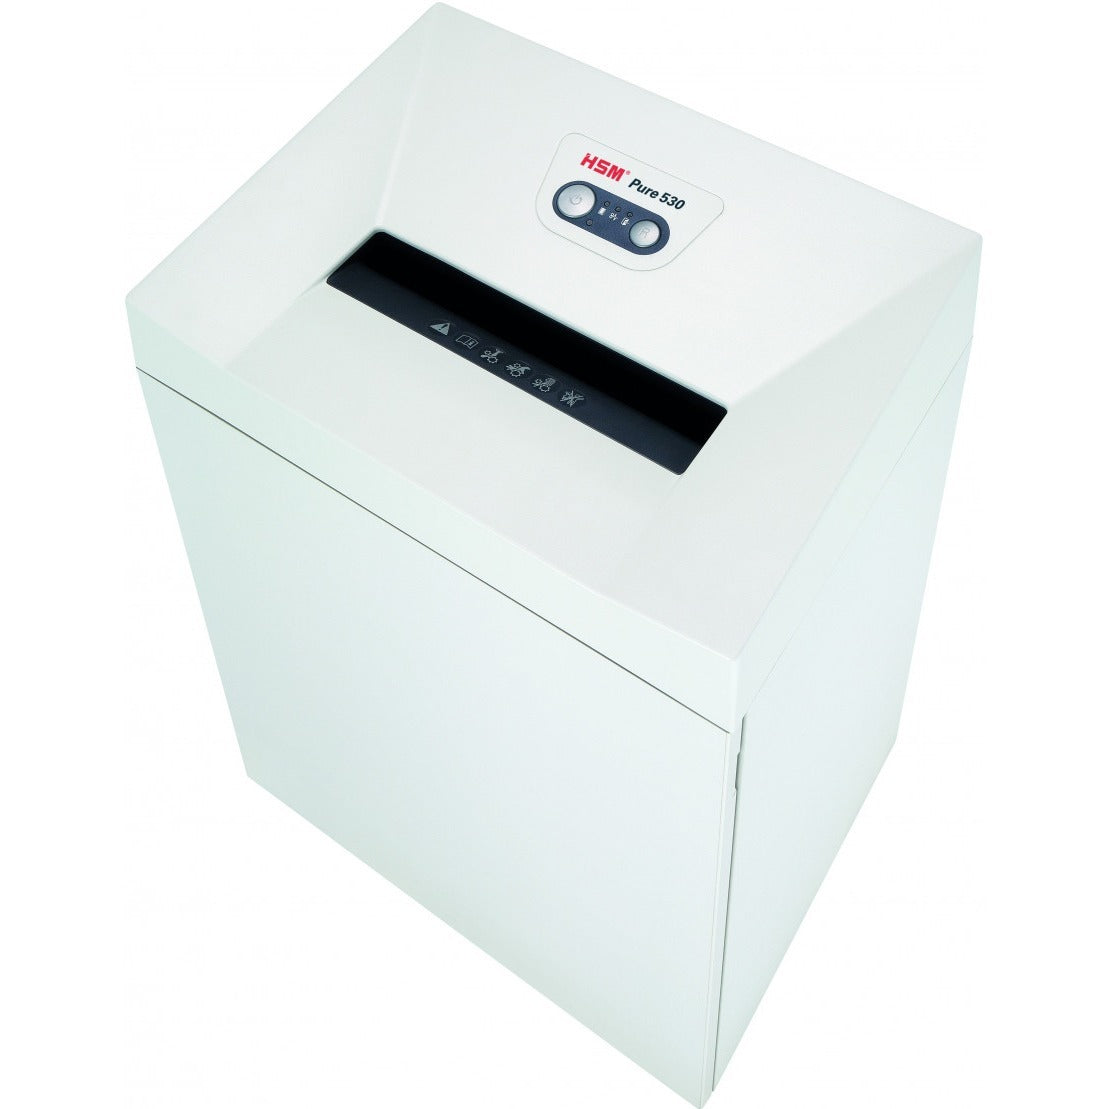 hsm-pure-530-3-16-x-1-1-8-continuous-shredder-particle-cut-16-per-pass-for-shredding-staples-paper-paper-clip-credit-card-cd-dvd-0188-x-1125-shred-size-p-4-o-3-t-4-e-3-f-1-1181-throat-2110-gal-wastebin-capacity-white_hsm2353113 - 3